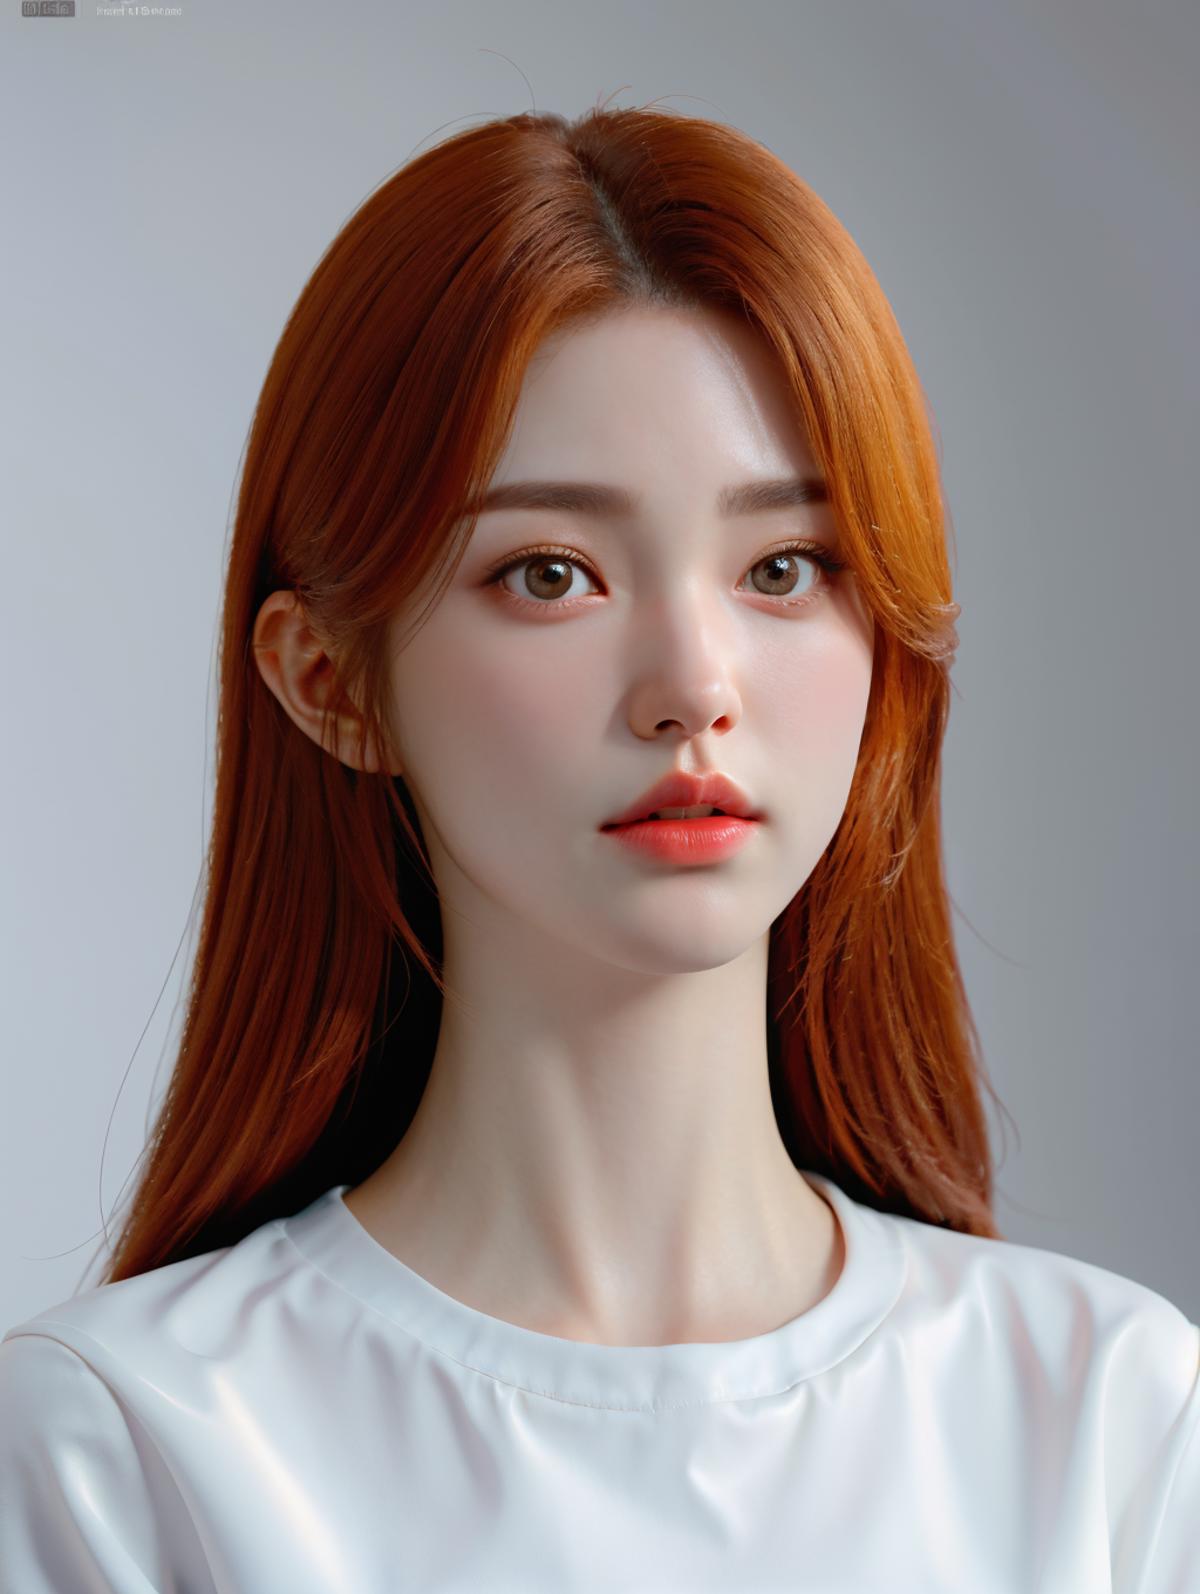 AI model image by eznorb